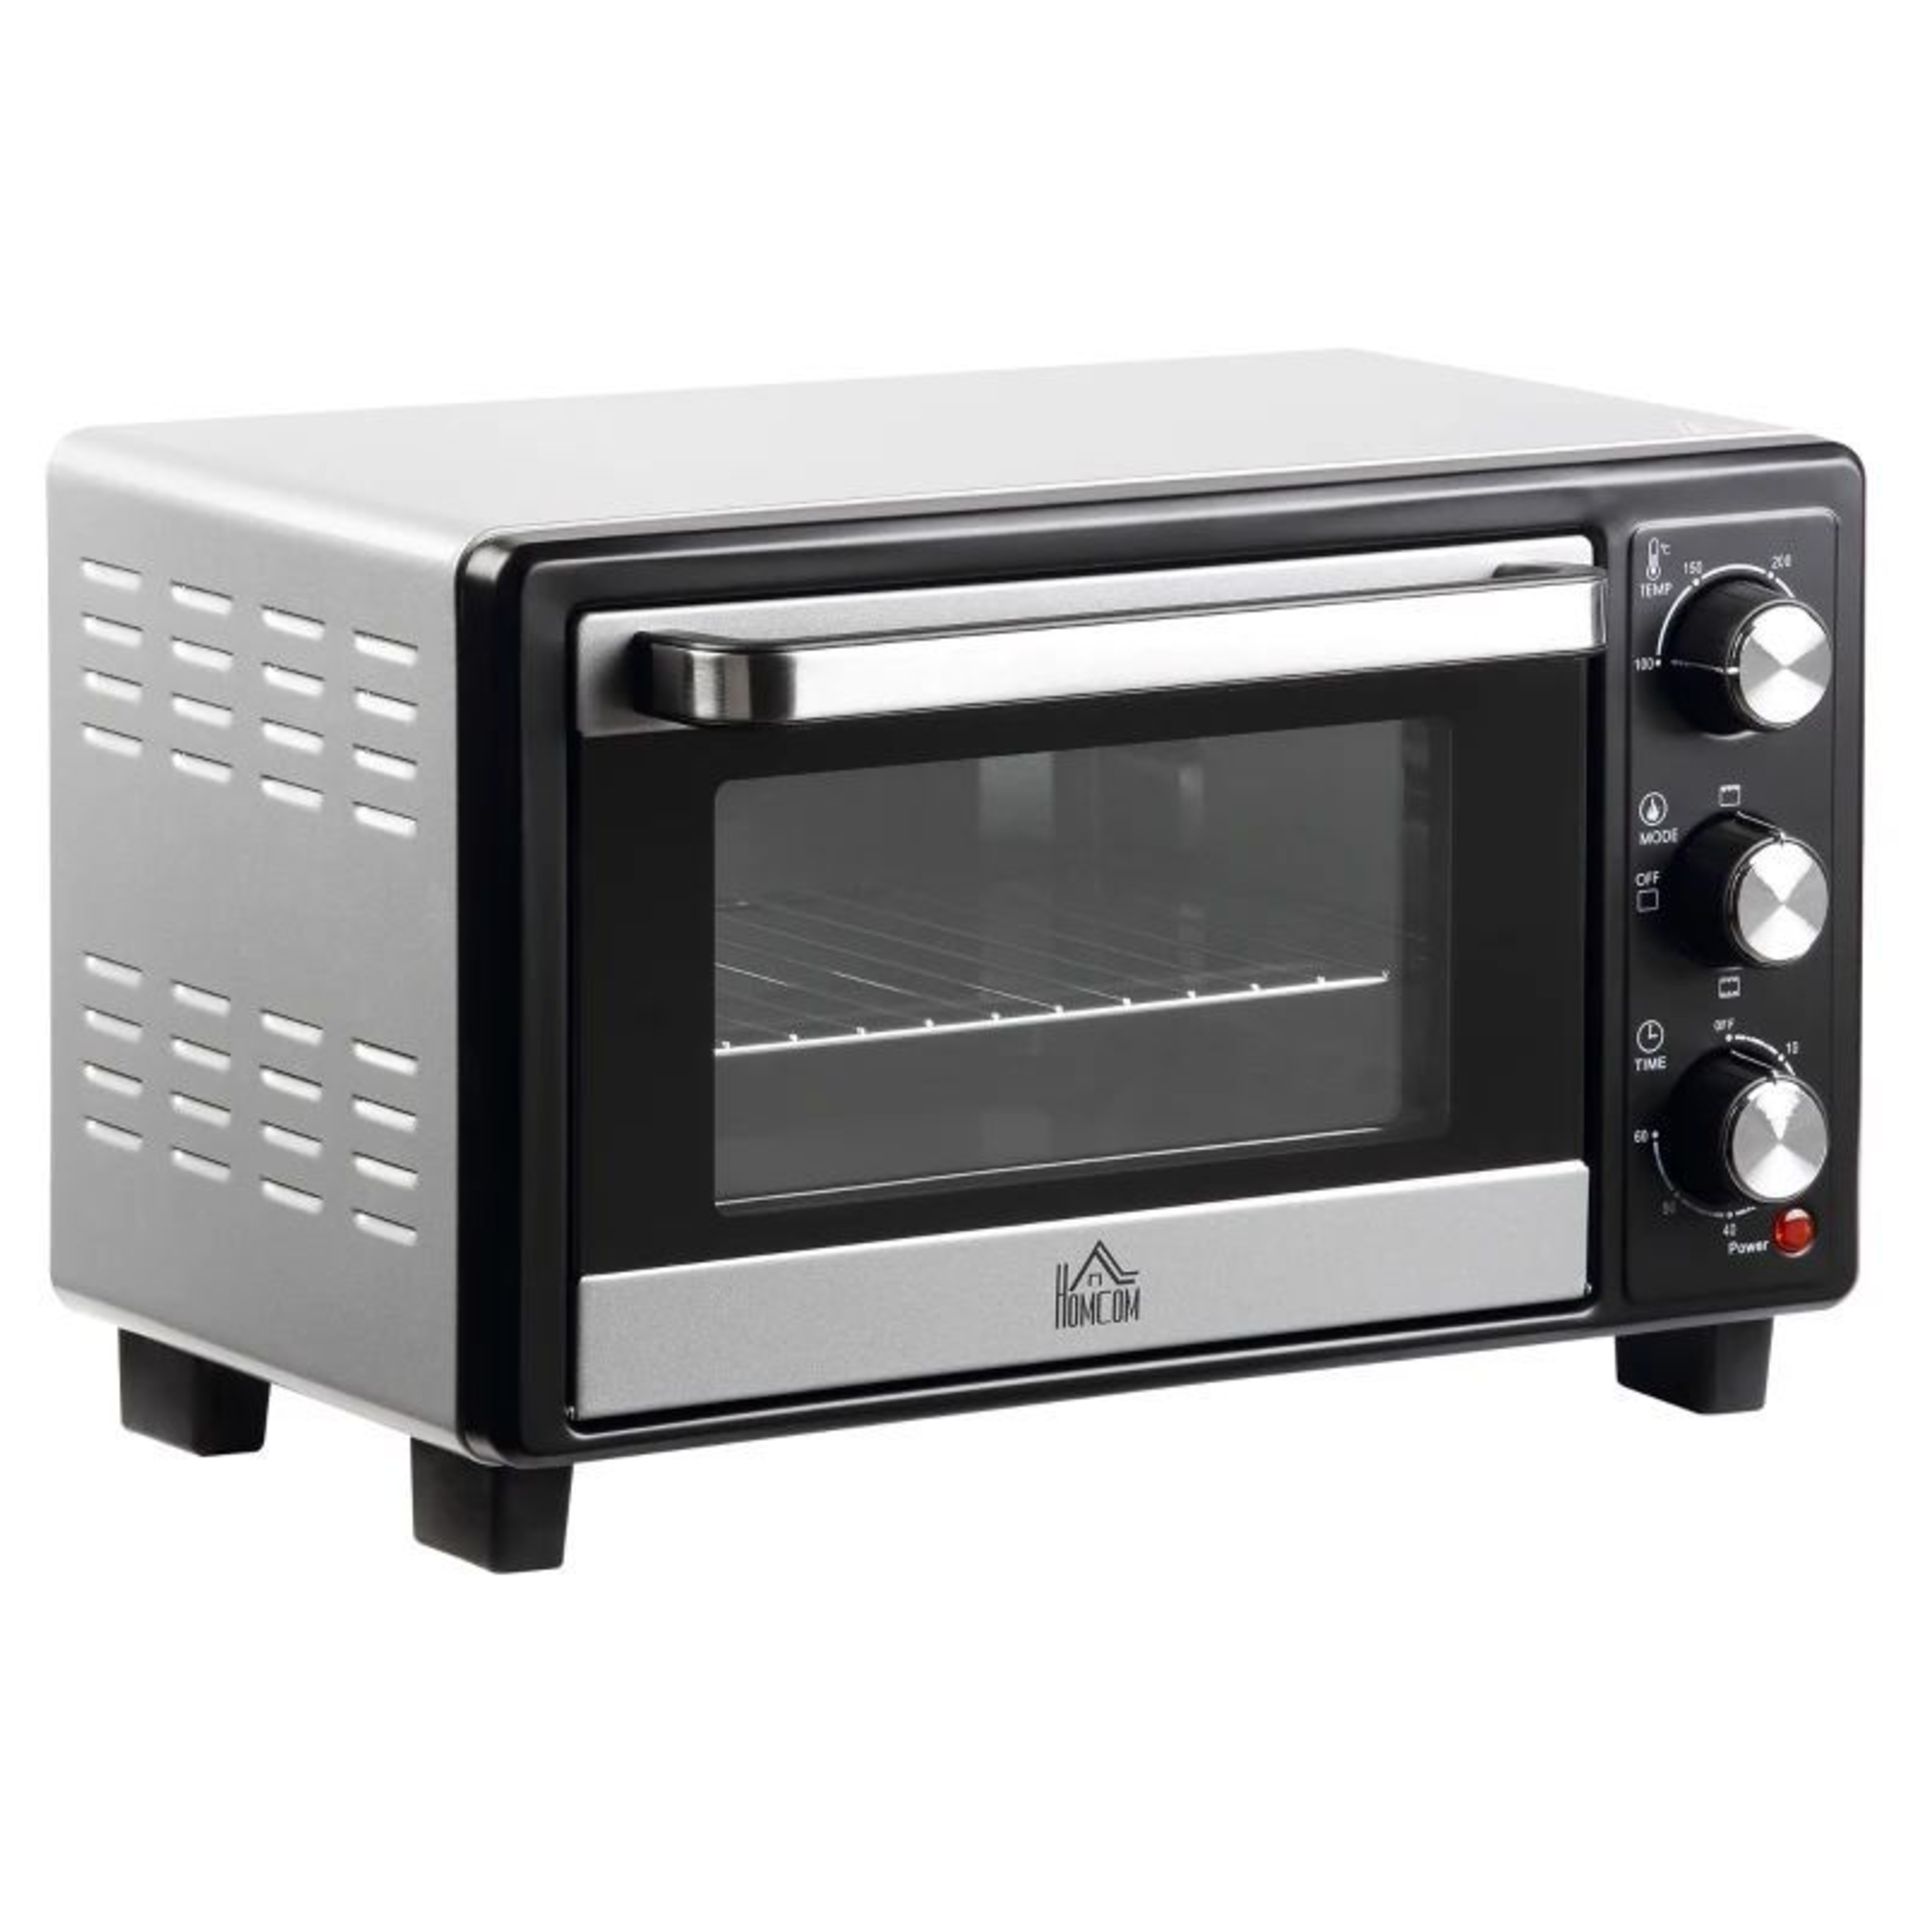 HOMCOM Mini Oven, 16L Countertop Electric Grill, Toaster Oven with Adjustable Temperature, 60 Min - Image 2 of 2